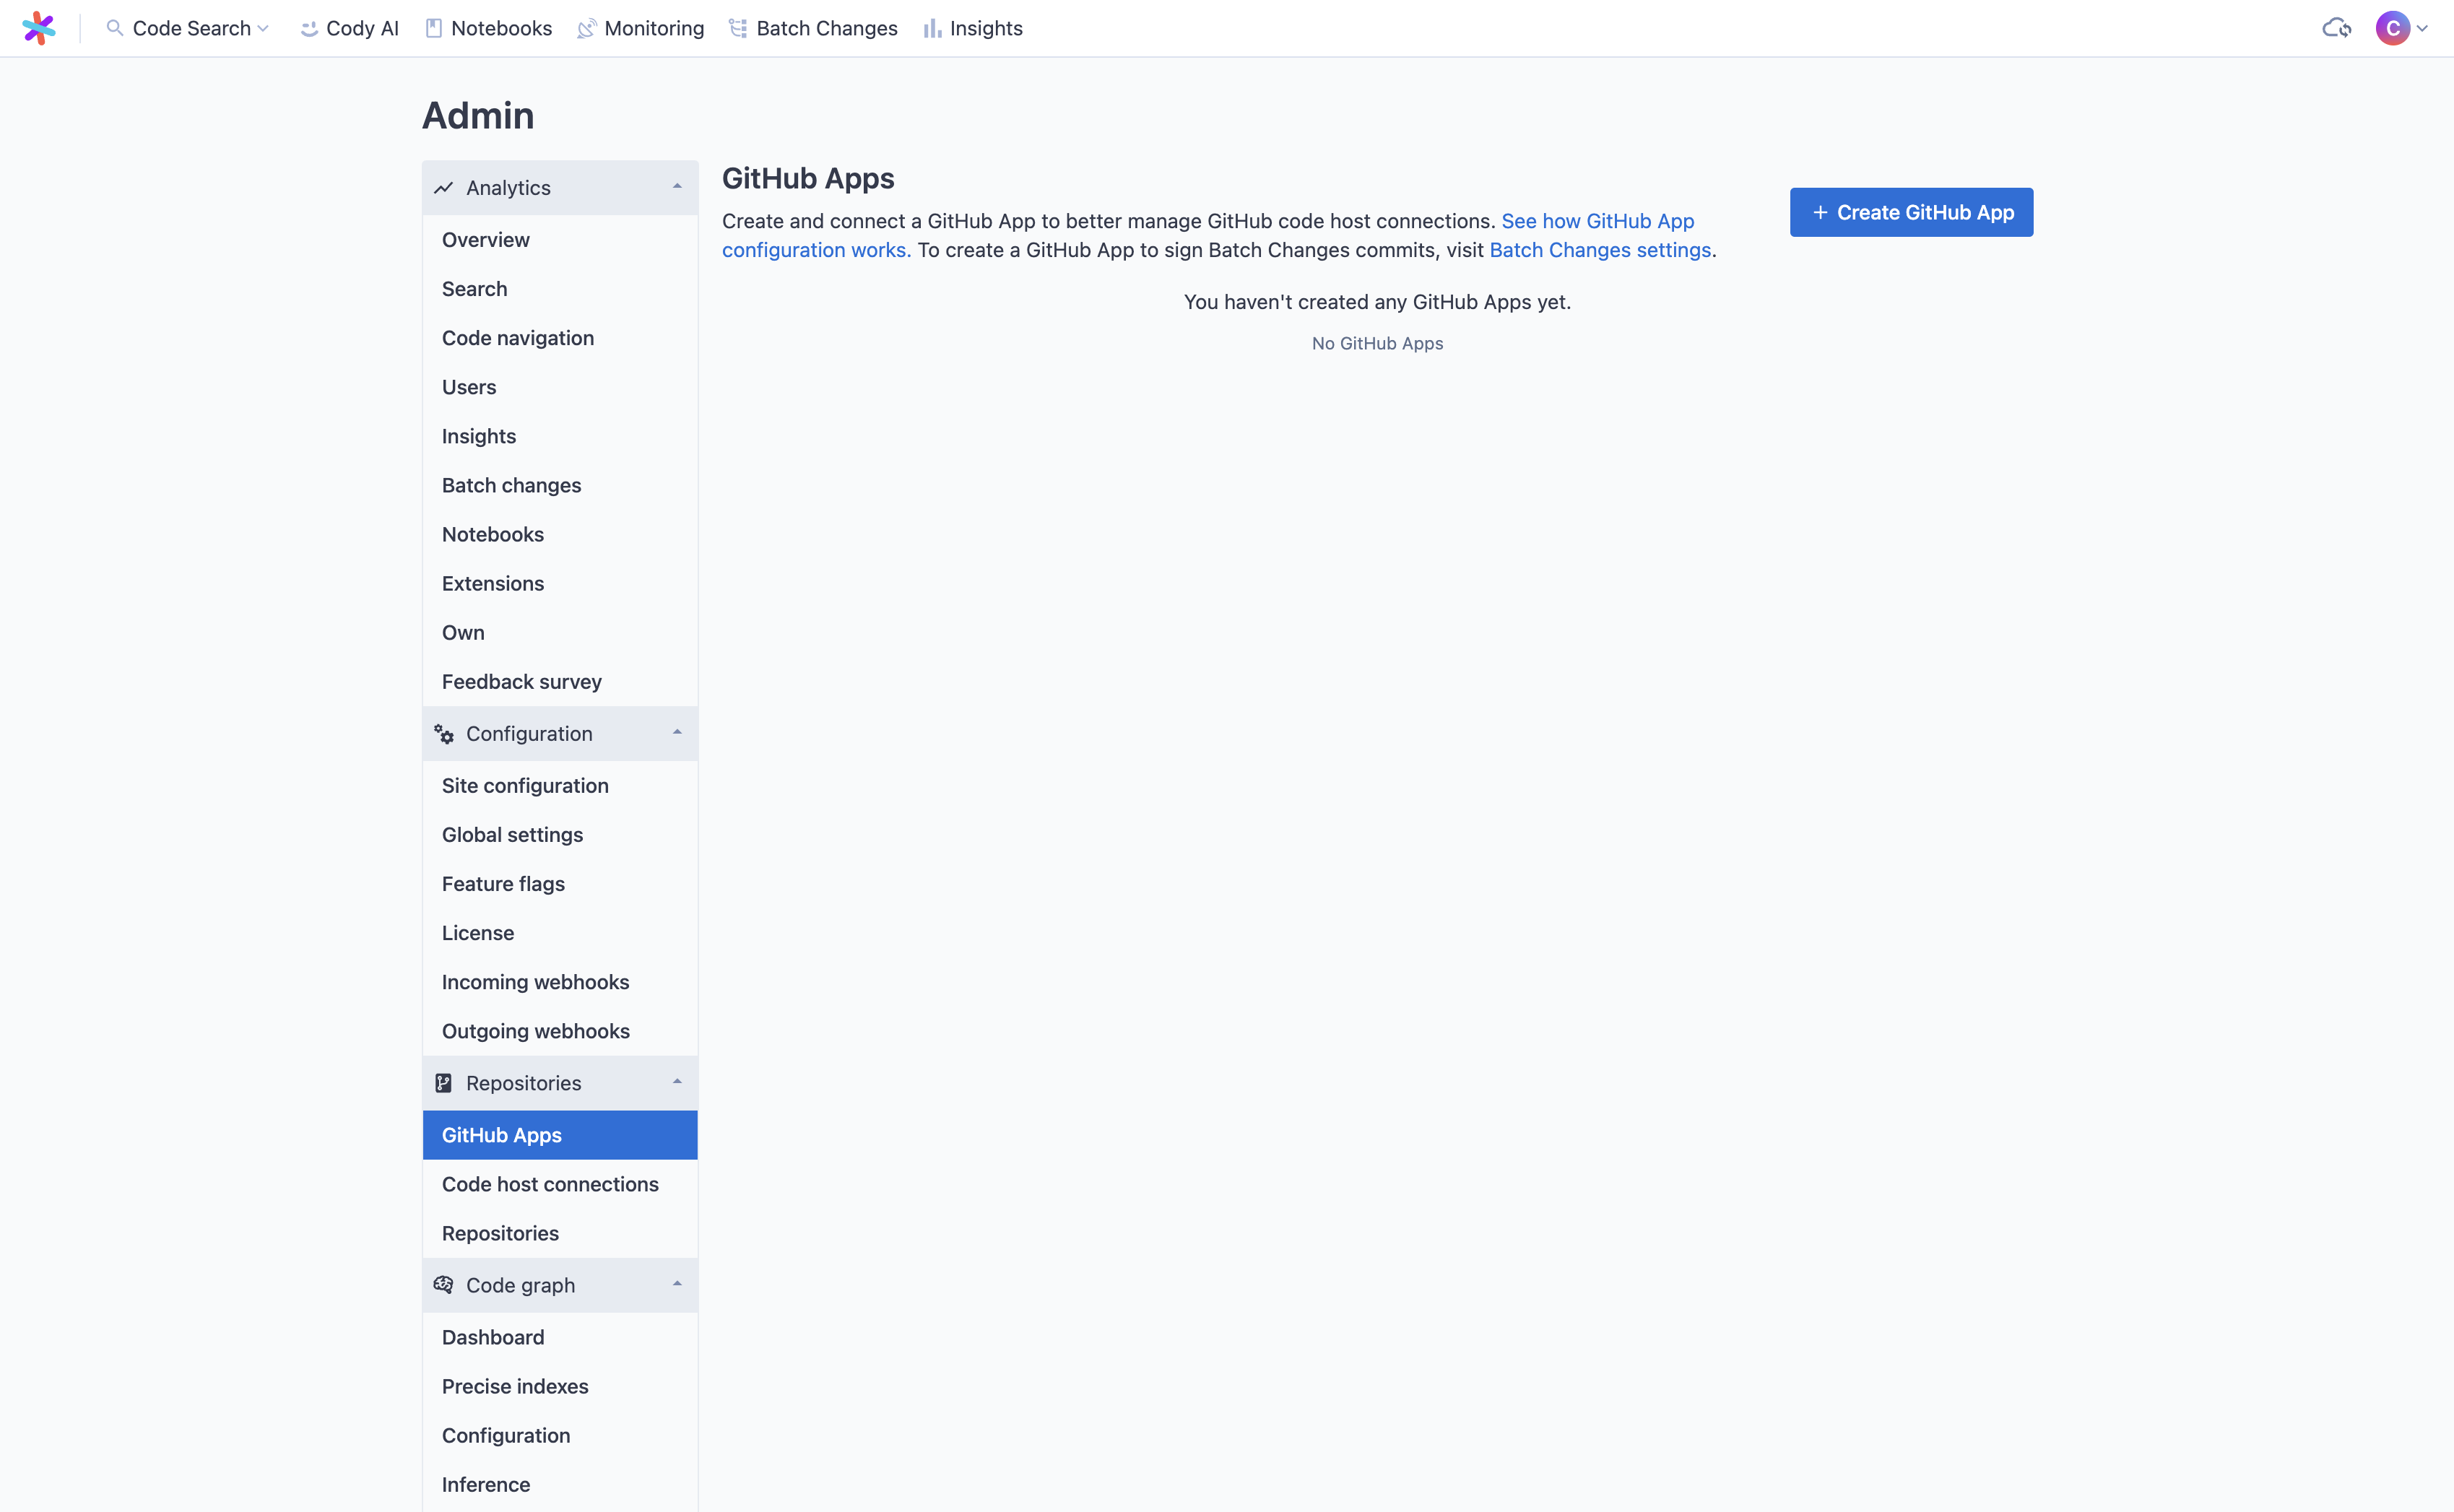 The GitHub Apps page on Sourcegraph